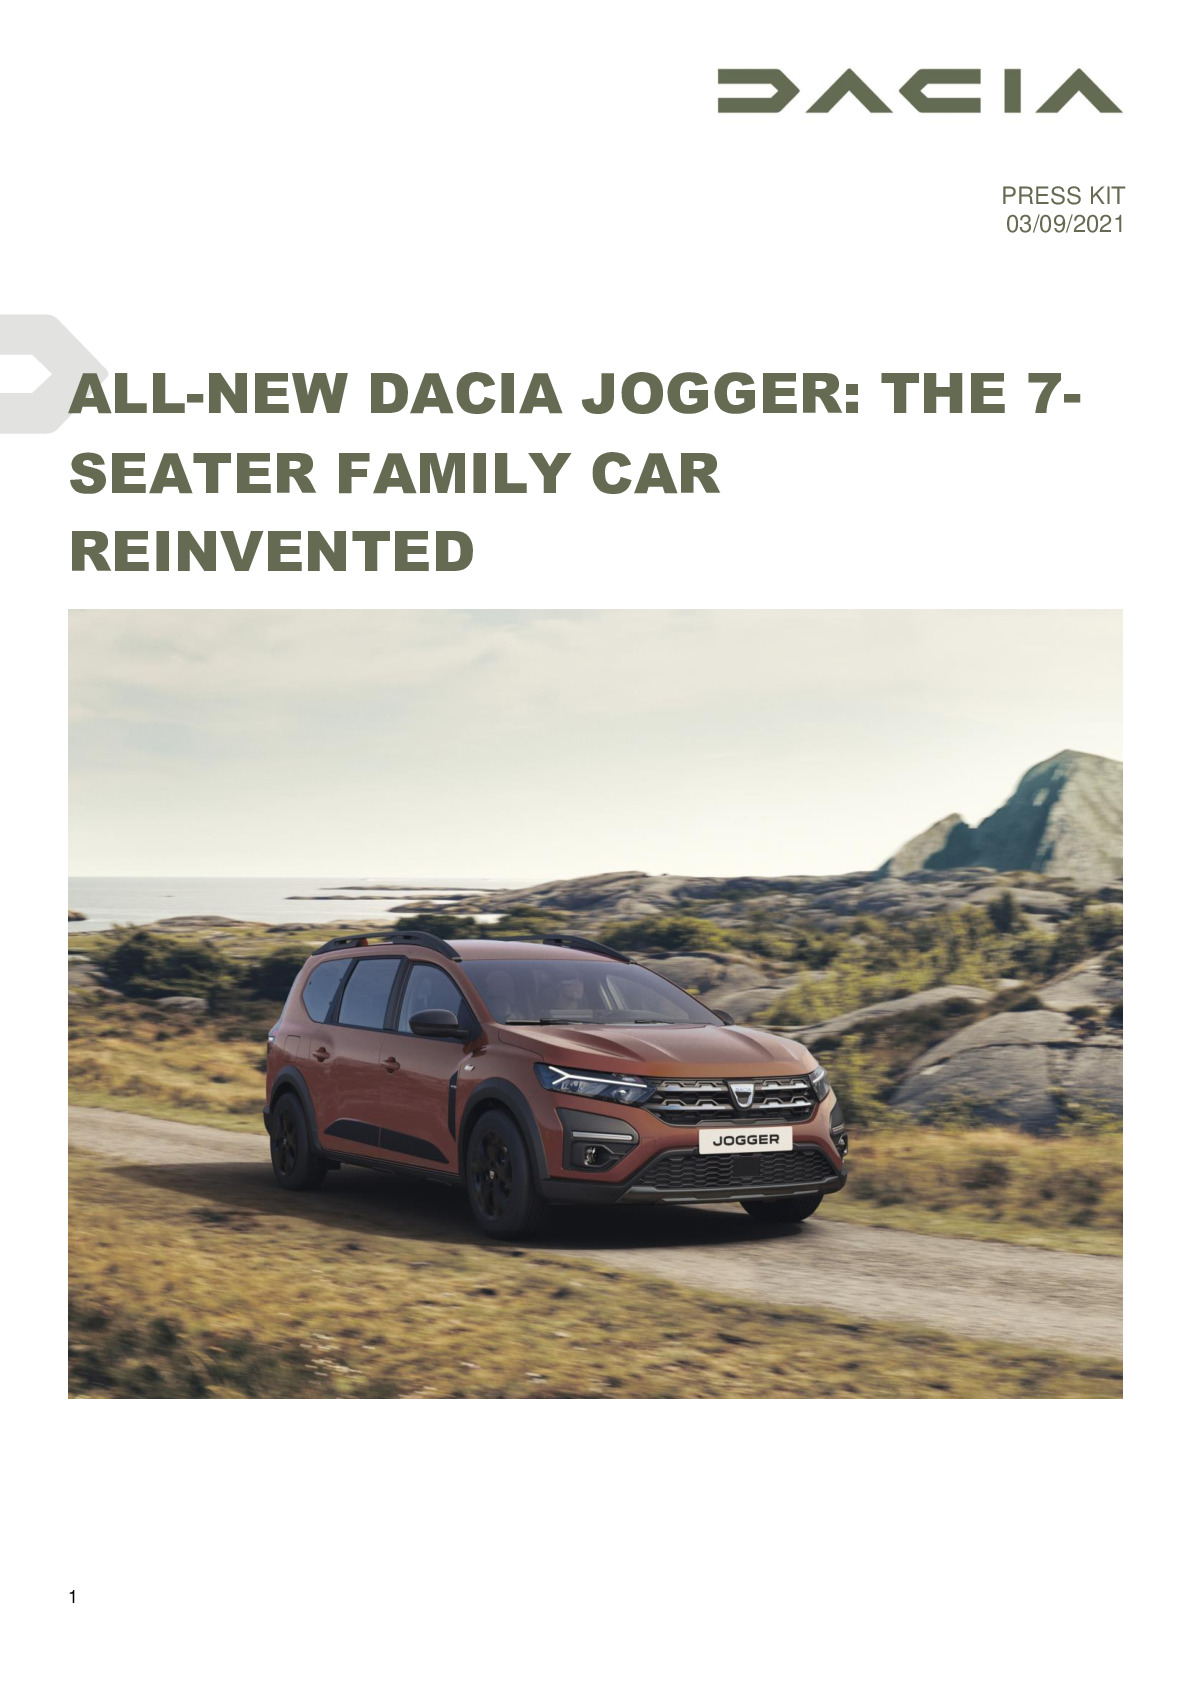 New Dacia Jogger Offers